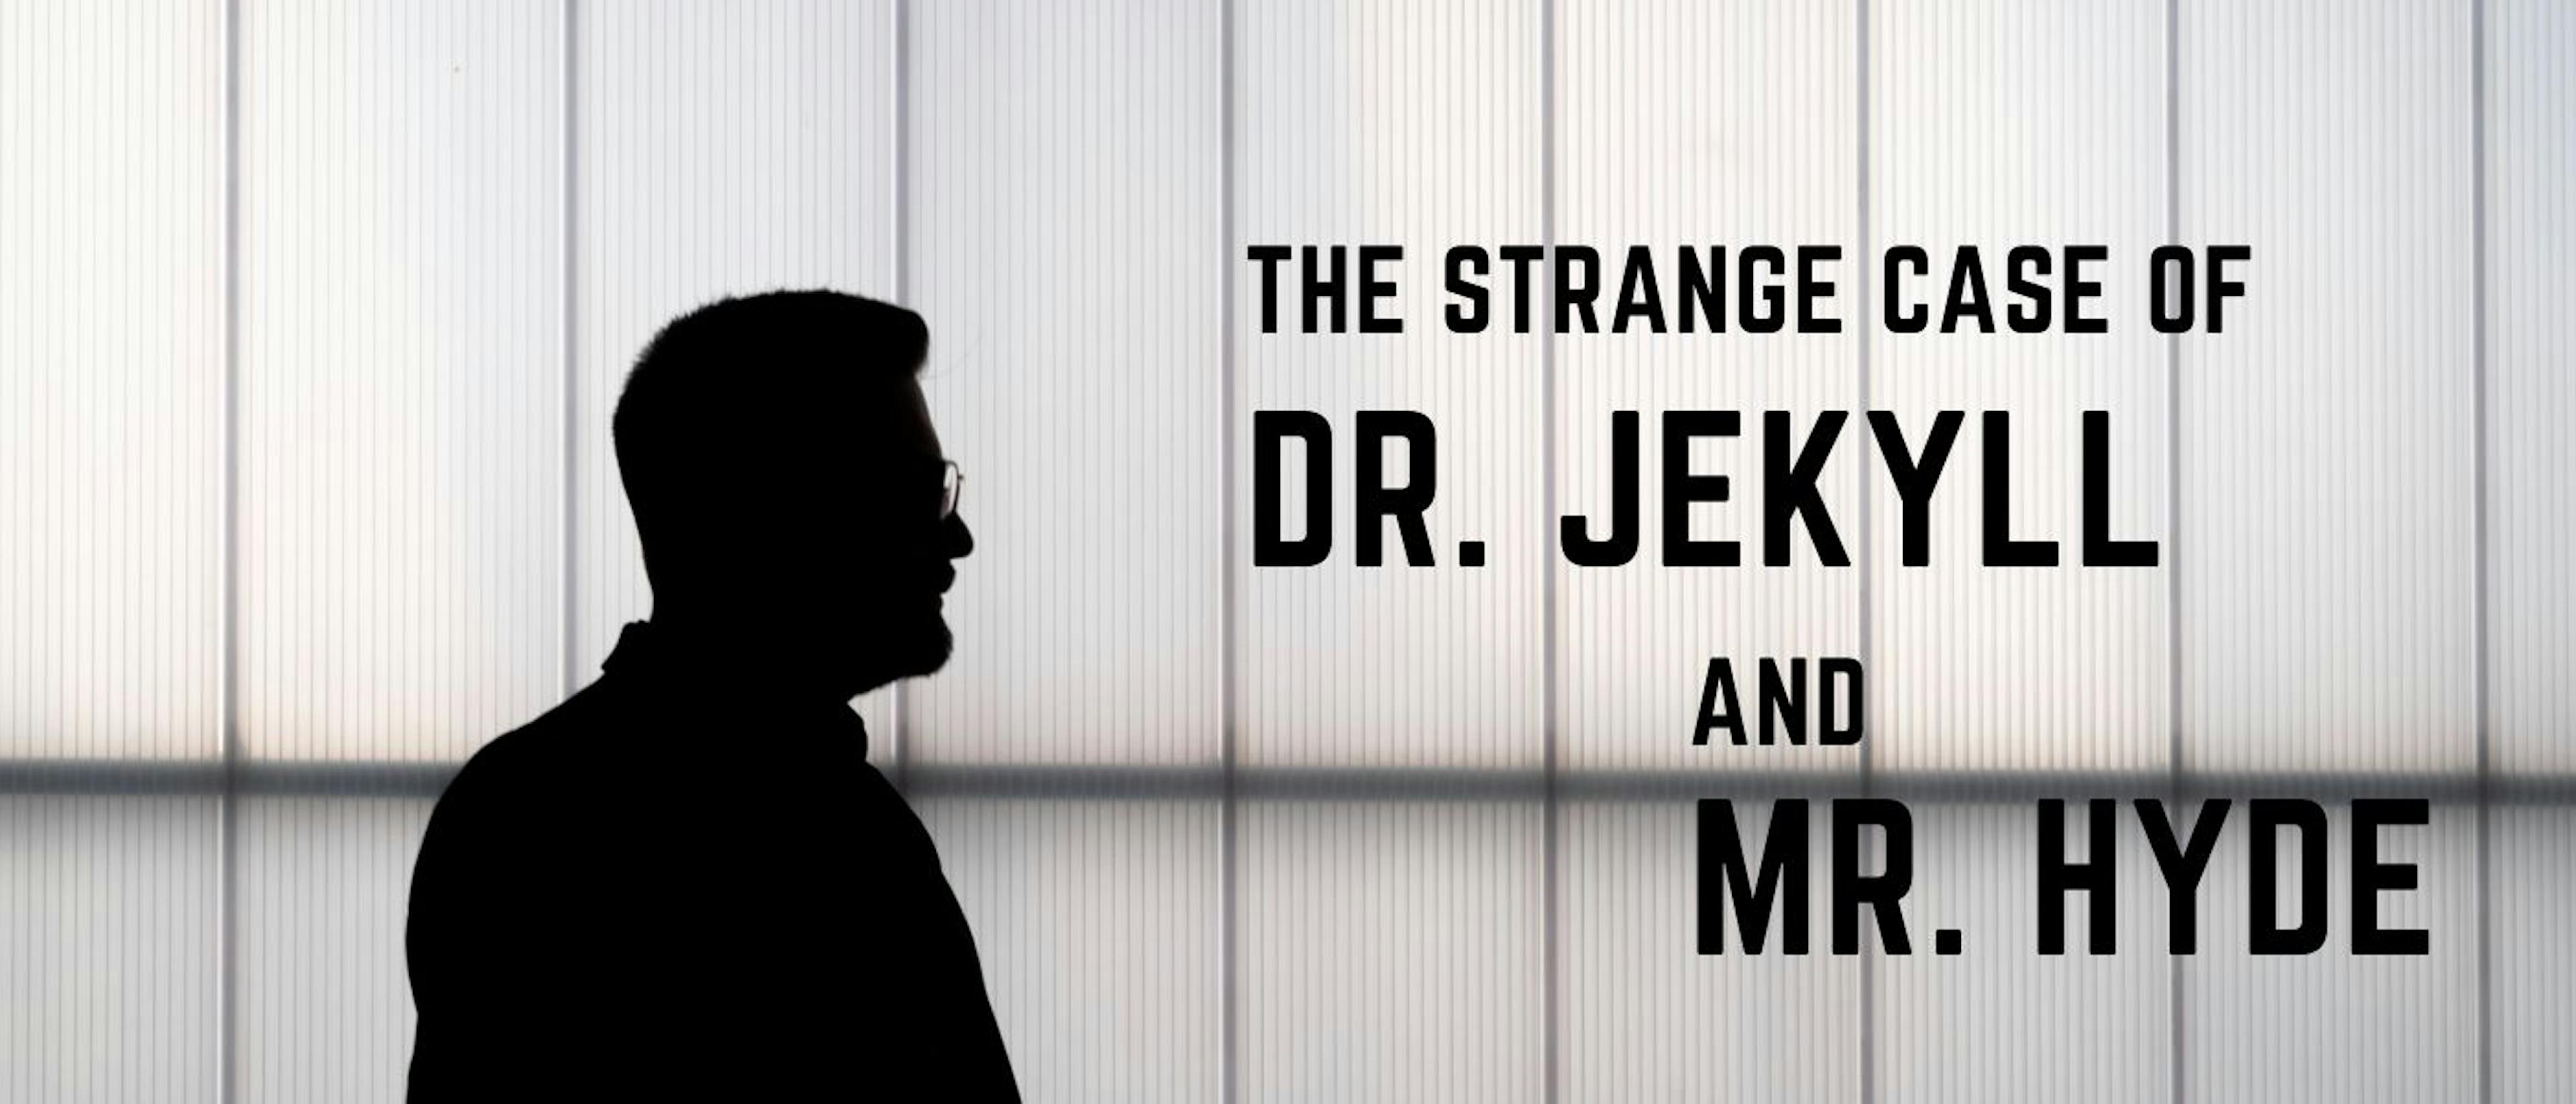 featured image - The Strange Case Of Dr. Jekyll And Mr. Hyde: Chapter II - Search for Mr. Hyde